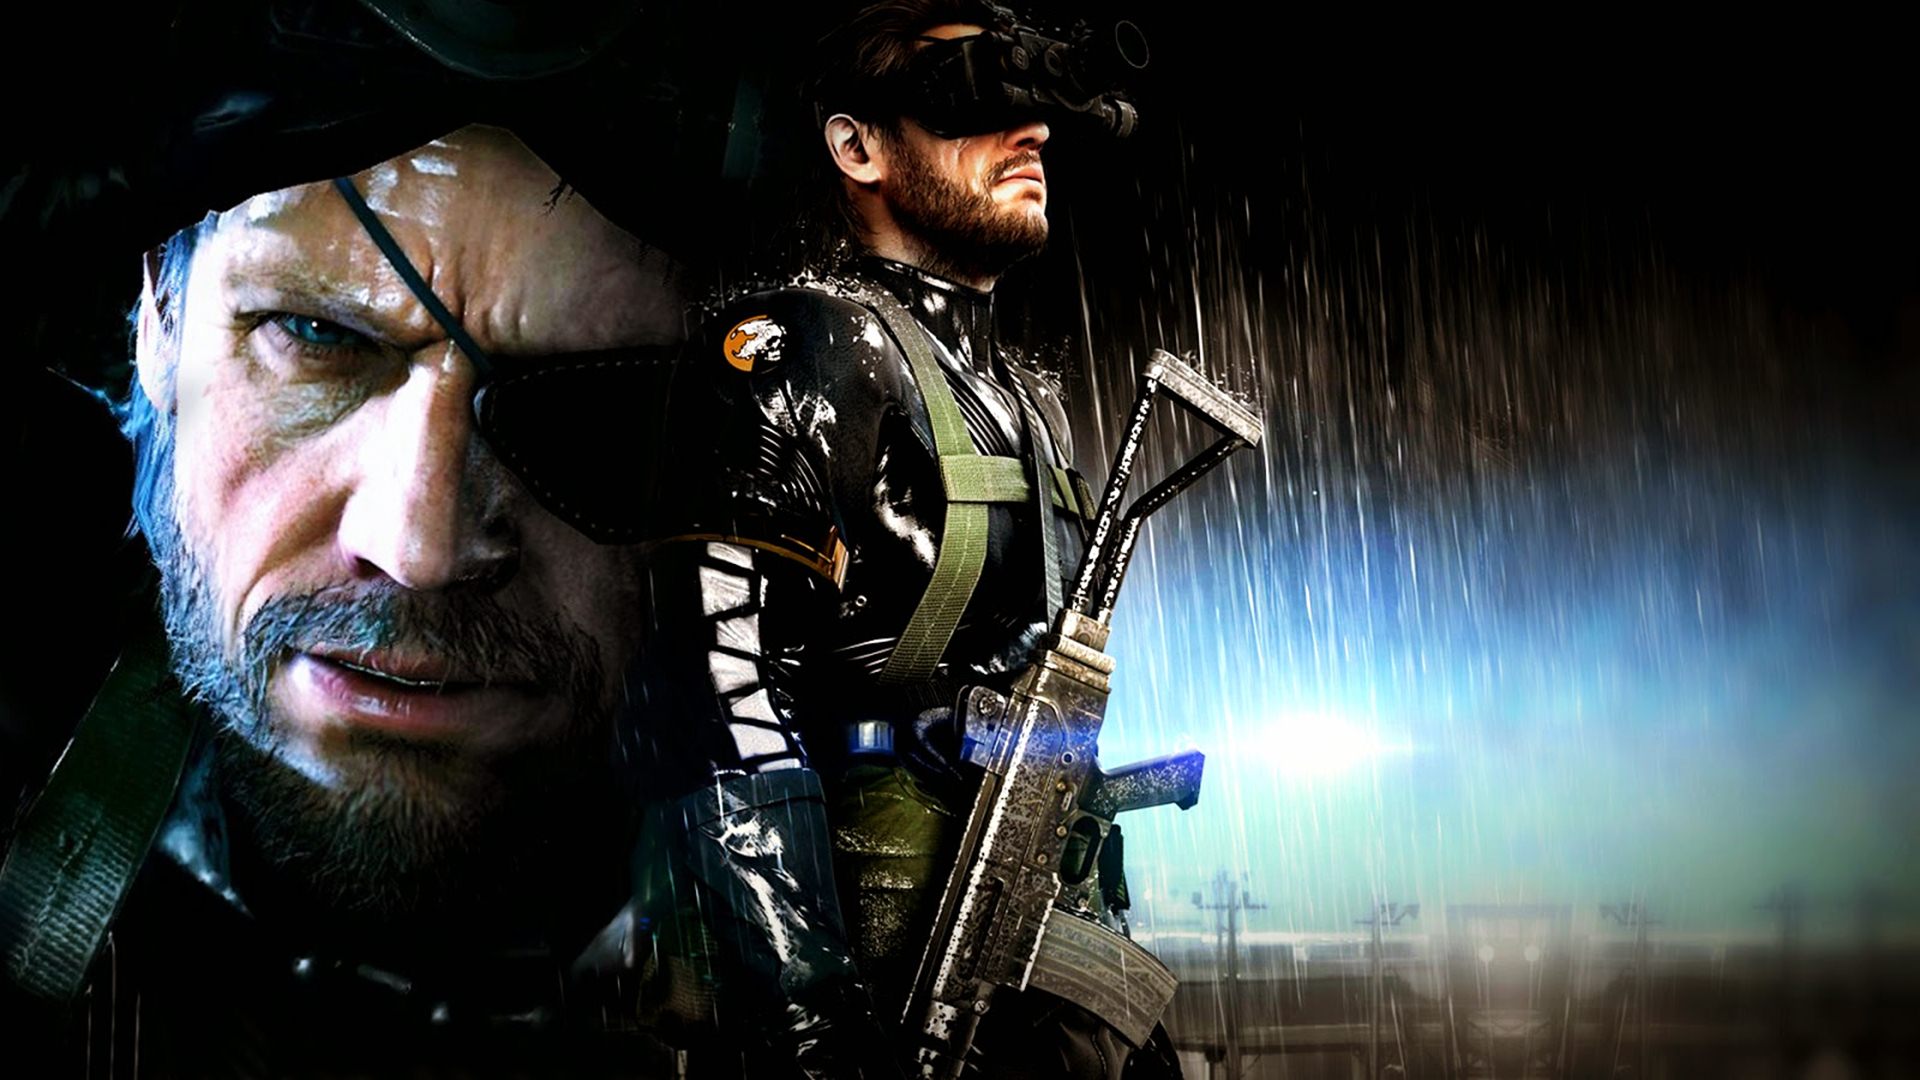 Metal Gear Solid 5: The Phantom Pain Wallpapers, Pictures ...